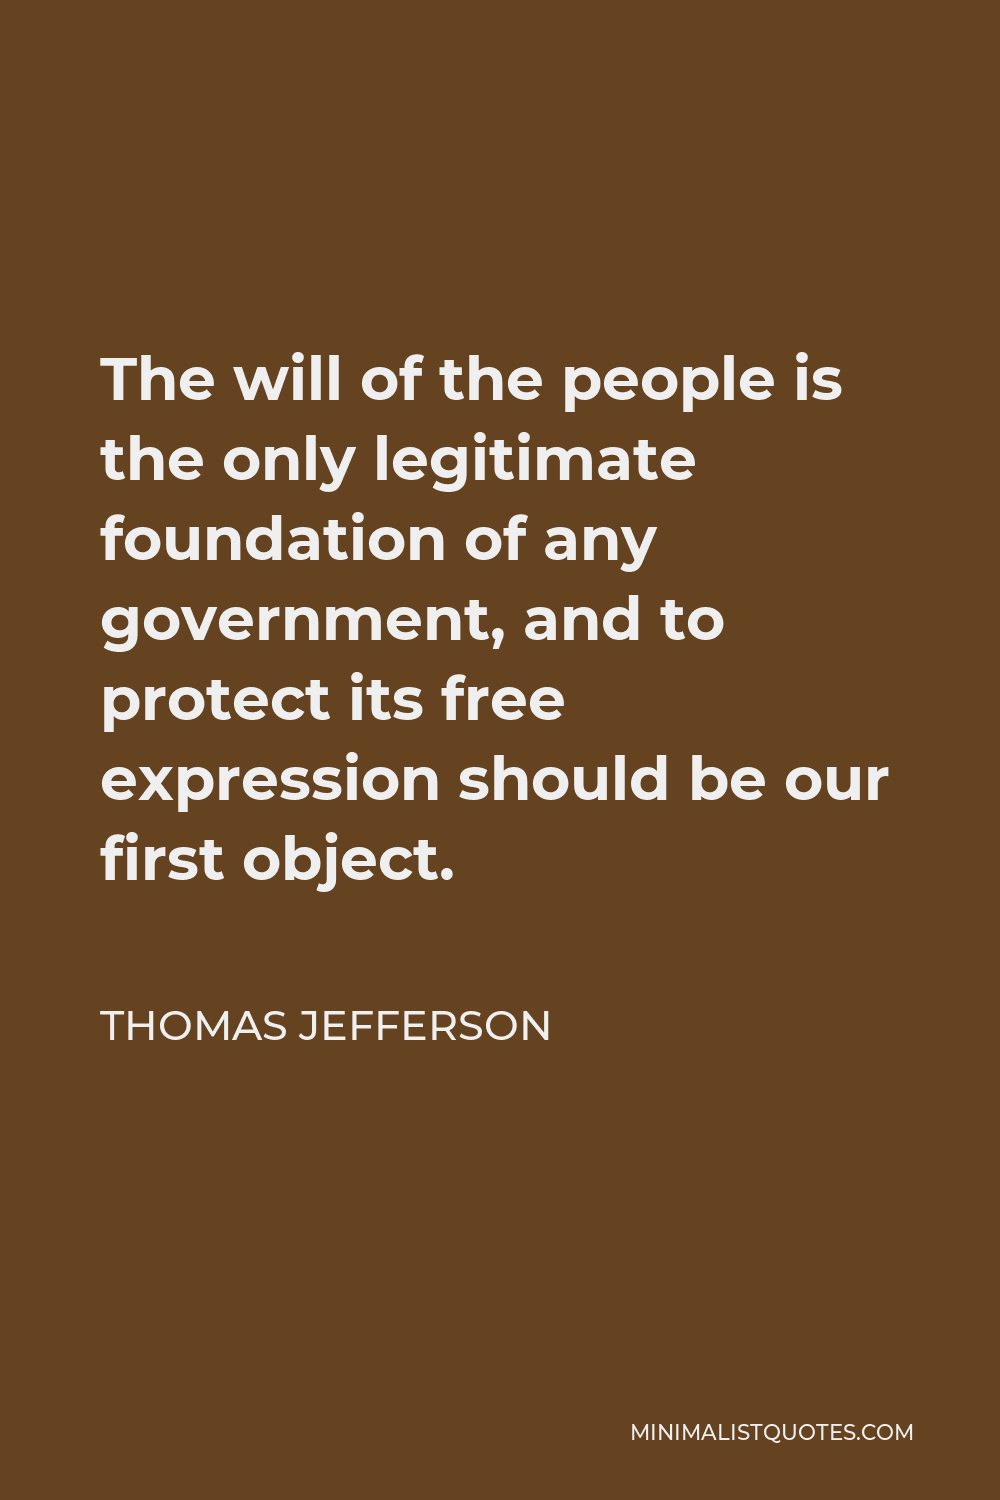 Thomas Jefferson Quote - The will of the people is the only legitimate foundation of any government, and to protect its free expression should be our first object.